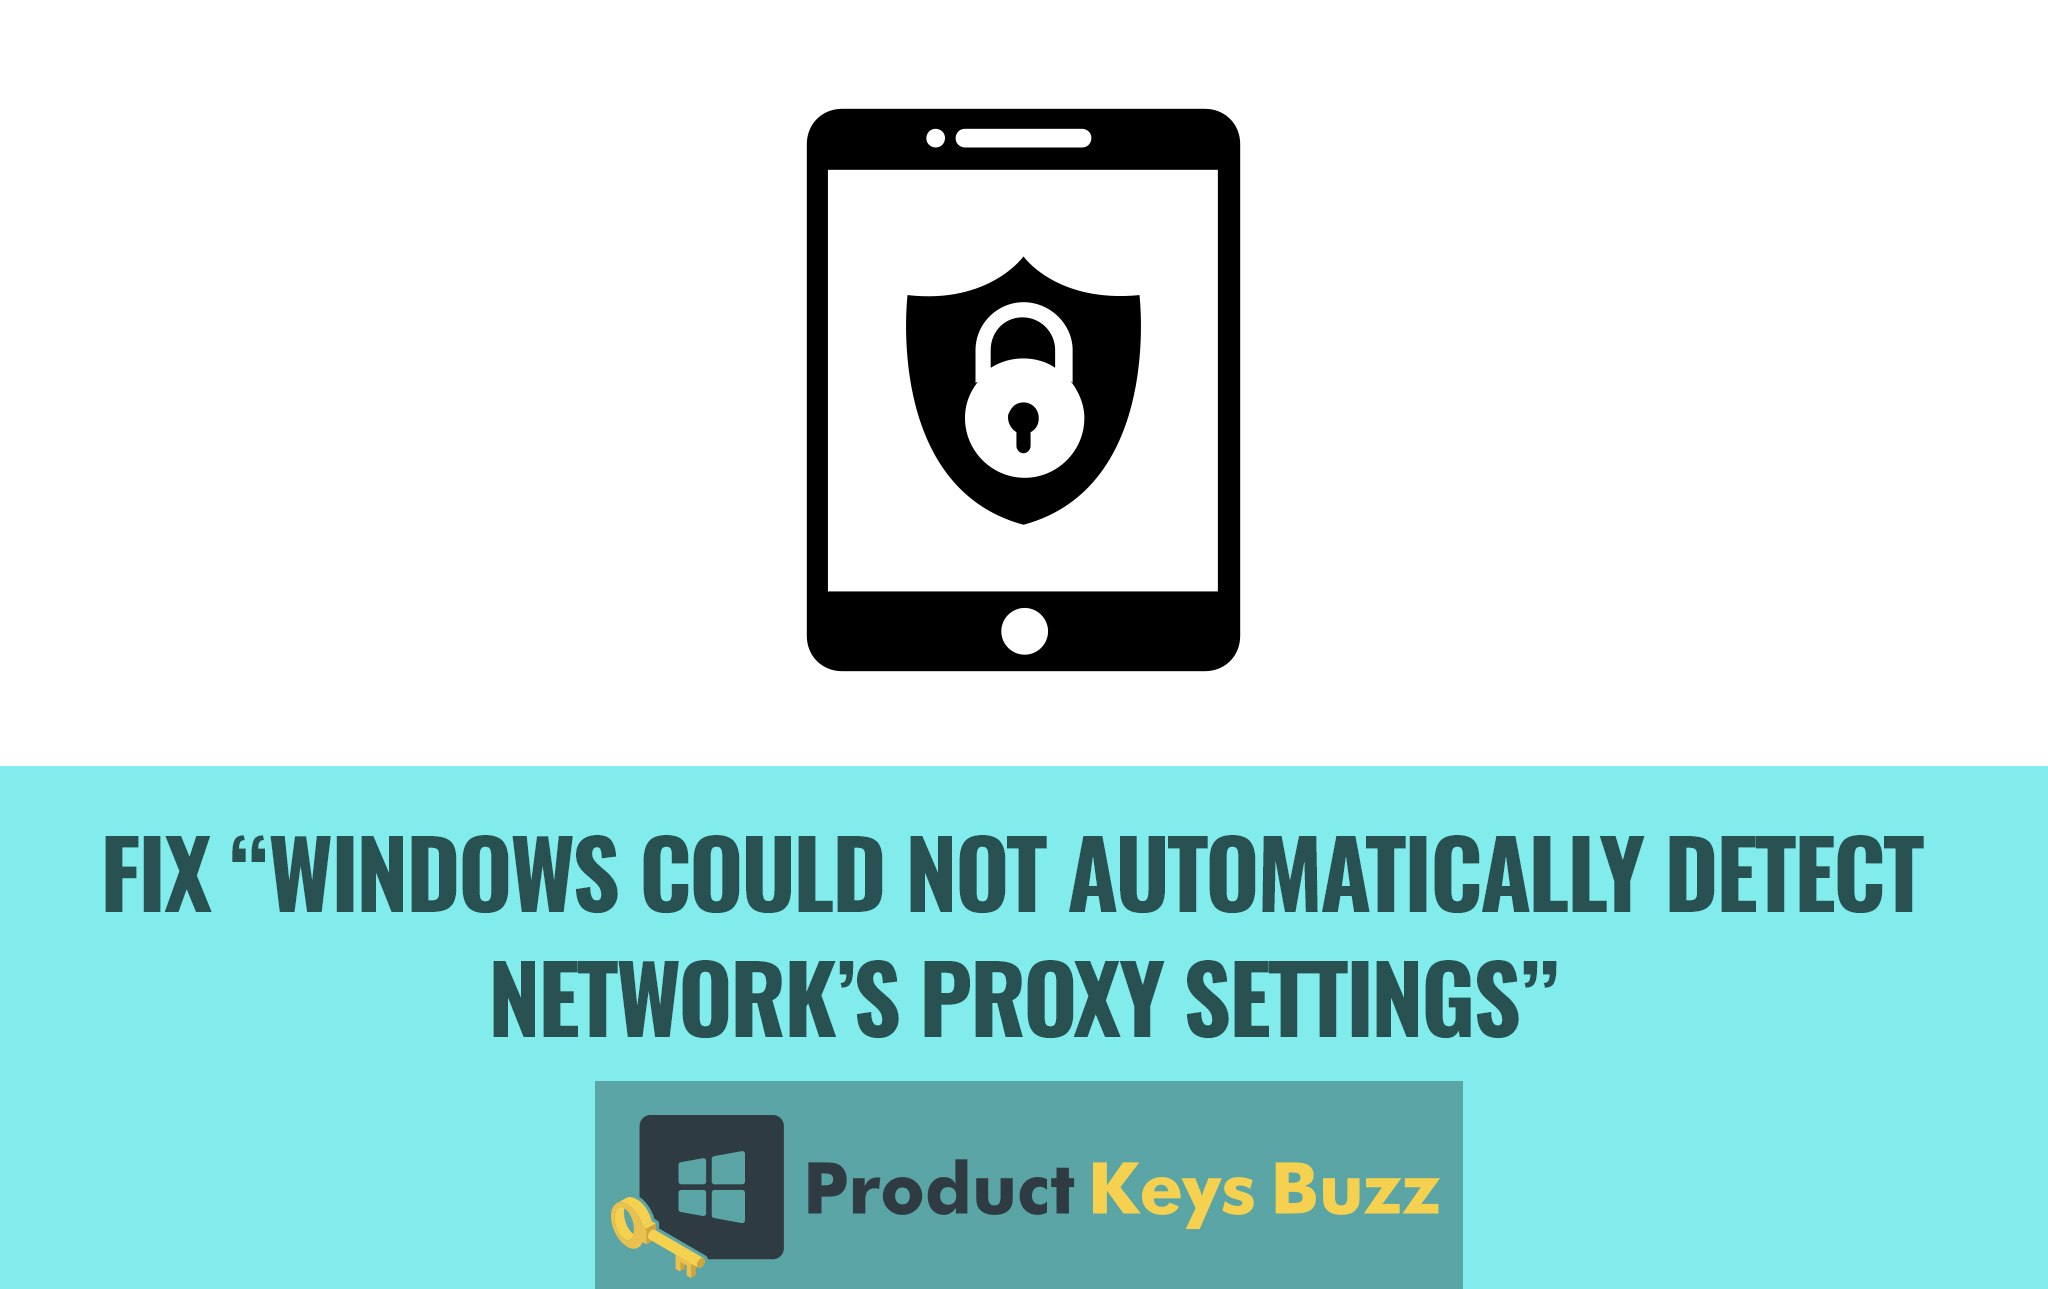 Fix “Windows could not automatically detect network’s proxy settings”